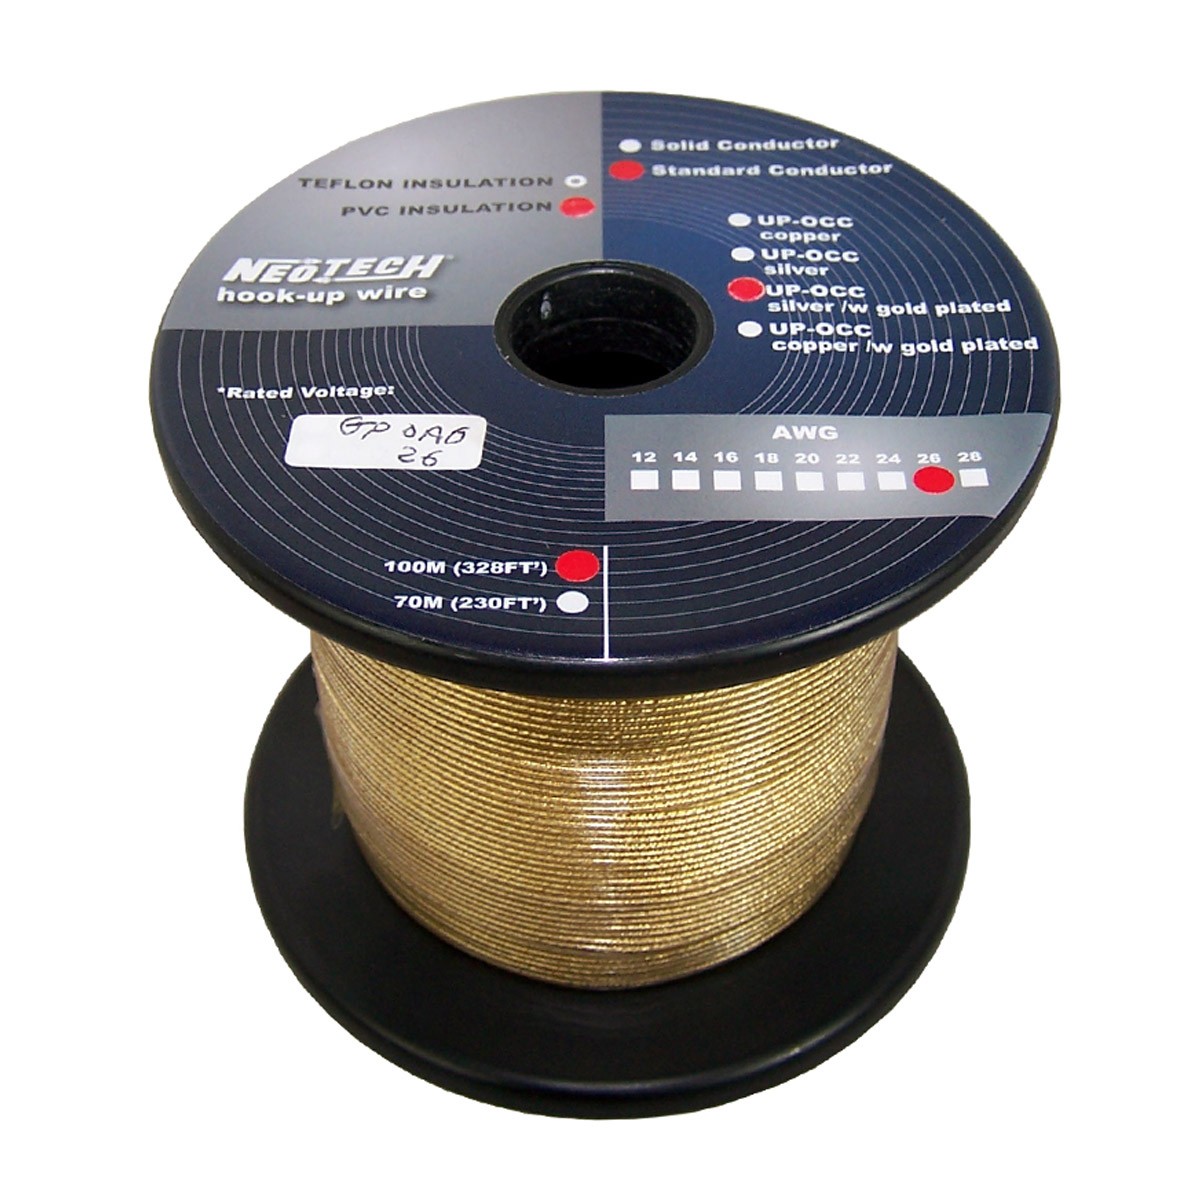 NEOTECH GP-OAG-24 Wiring Cable Gold Plated UP-OCC Silver 0.205mm²